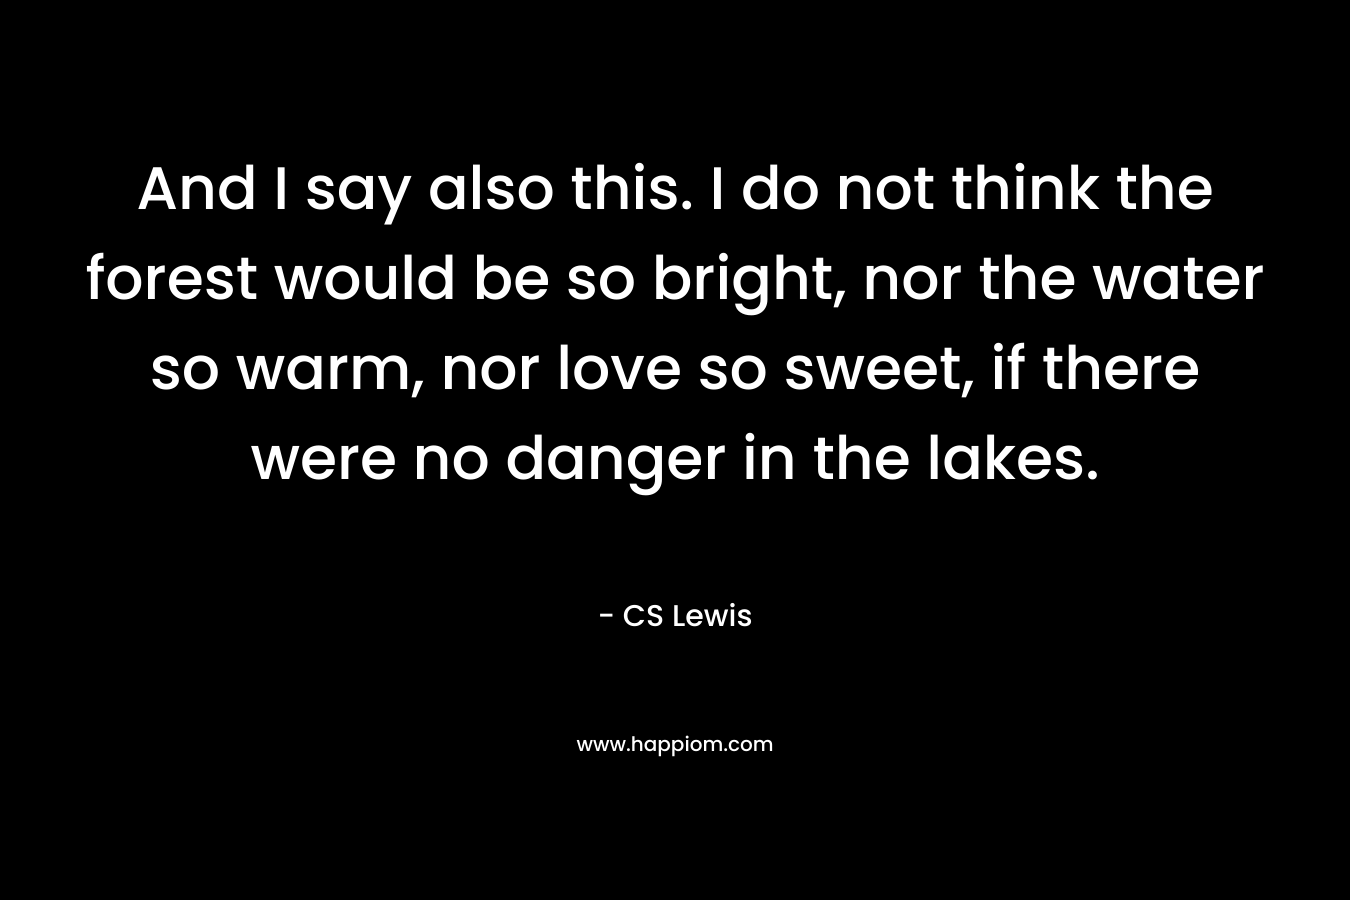 And I say also this. I do not think the forest would be so bright, nor the water so warm, nor love so sweet, if there were no danger in the lakes. – CS Lewis